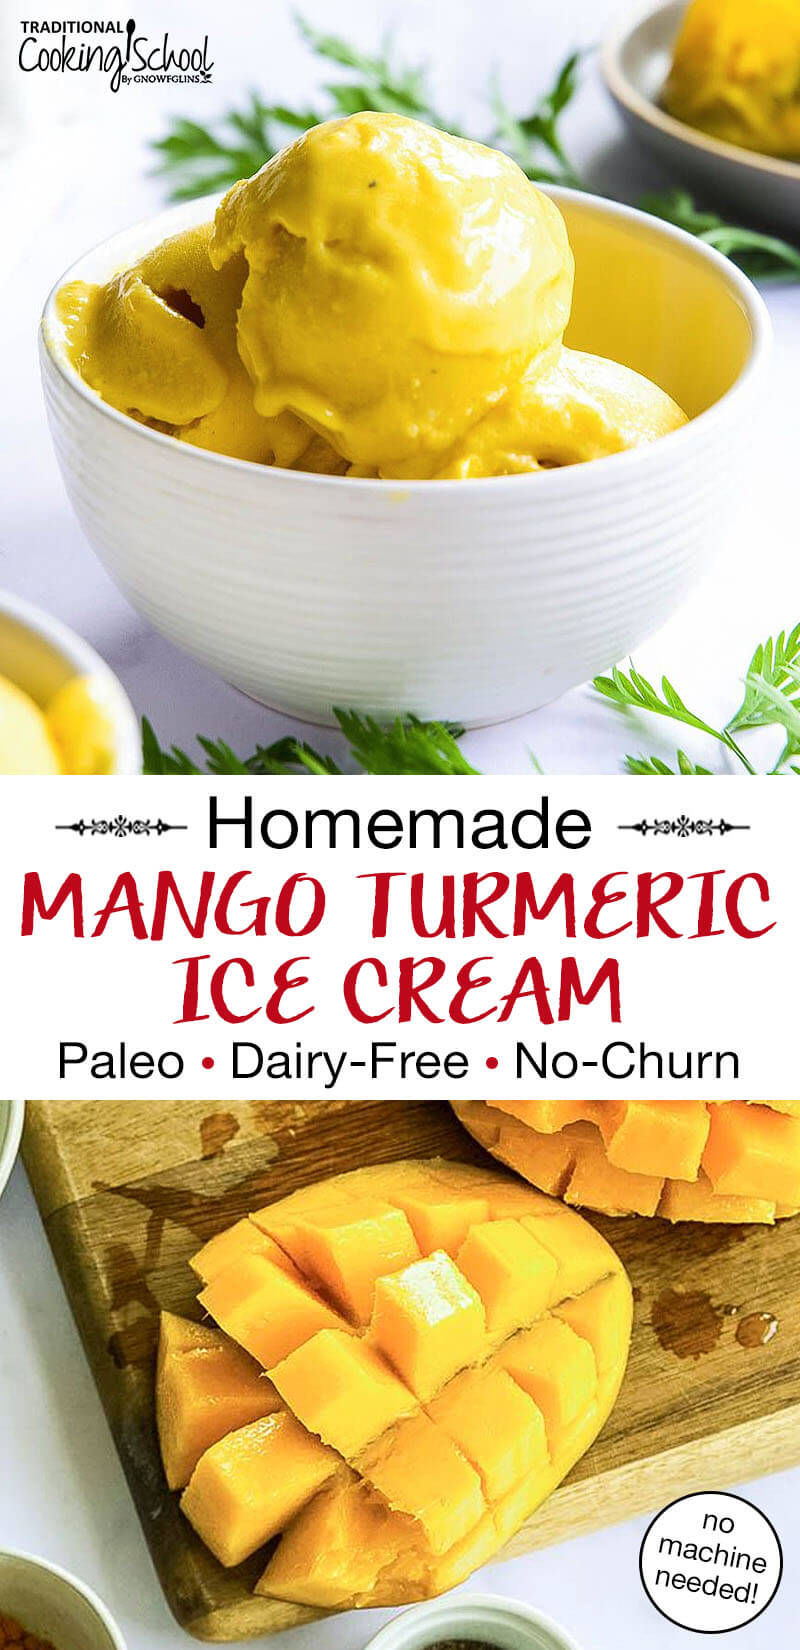 photo collage of bowl of bright yellow scoops of ice cream, and a fresh mango cut open and sliced. Text overlay says: "Homemade Mango Turmeric Ice Cream (Paleo, Dairy-Free, No-Churn) (no machine needed!)"